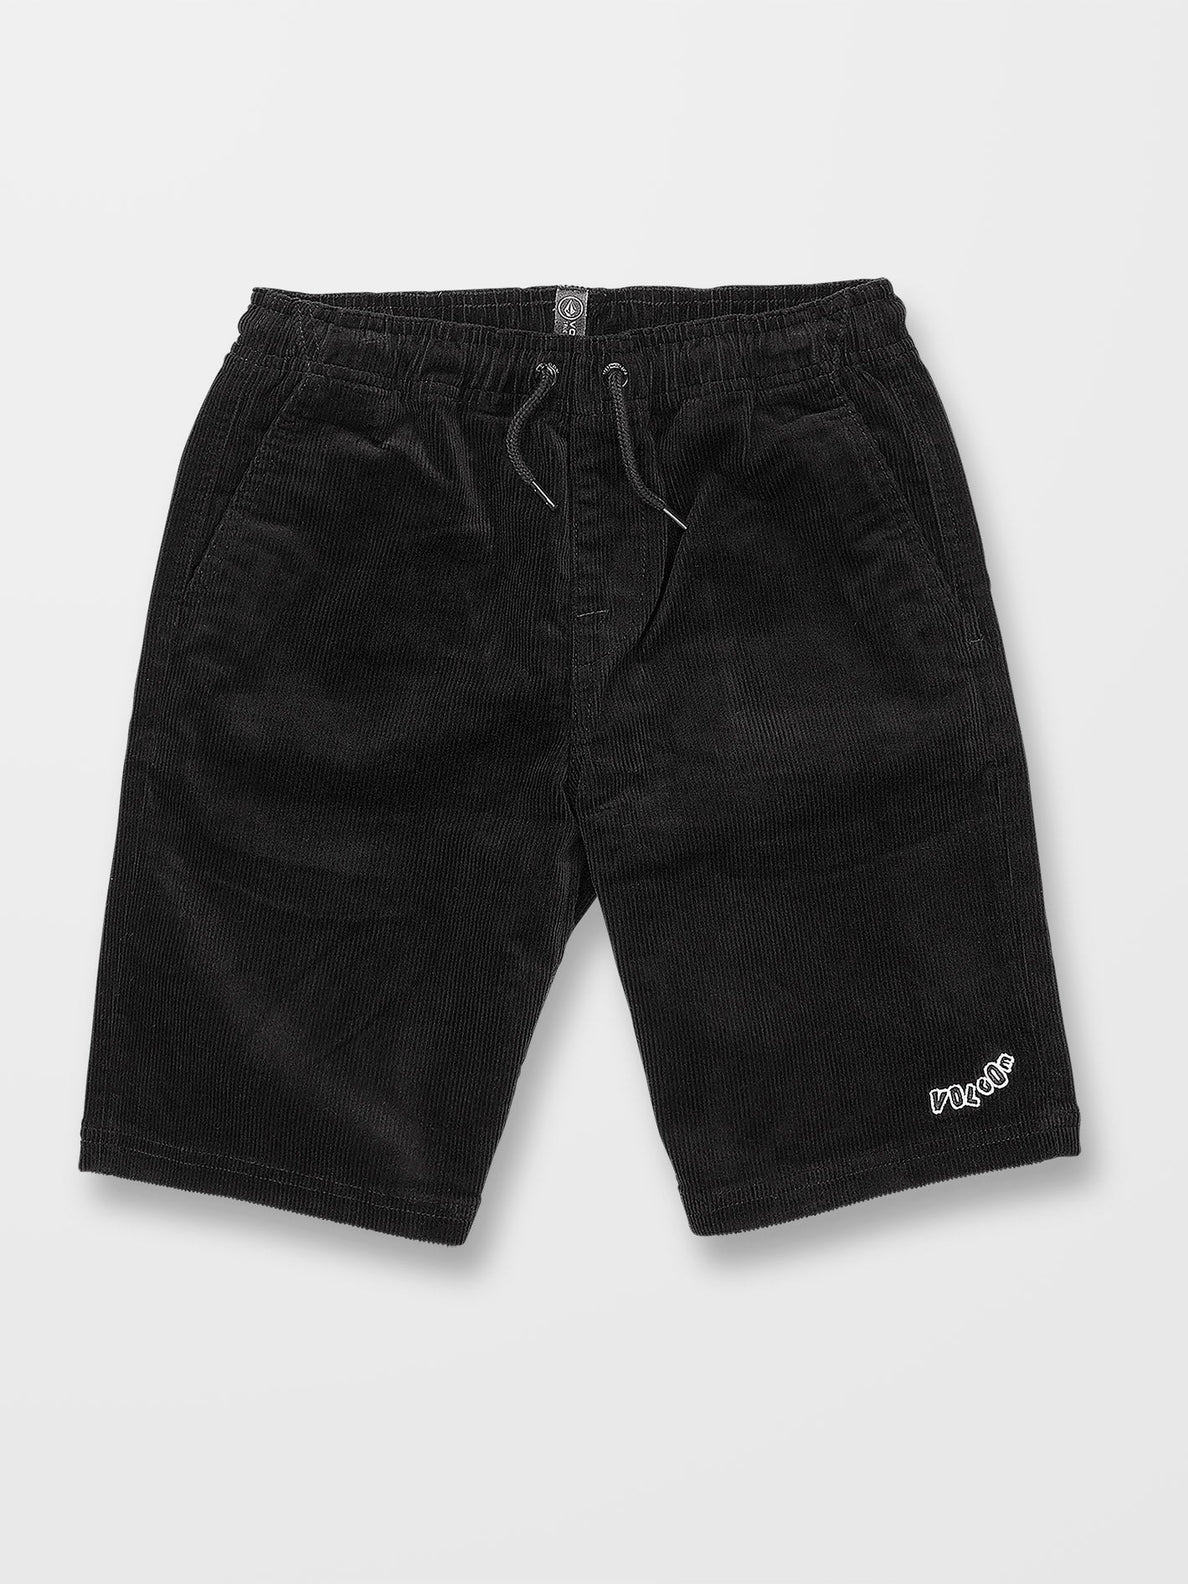 Outer Spaced Short - BLACK COMBO - (KIDS) (C1012331_BLC) [F]